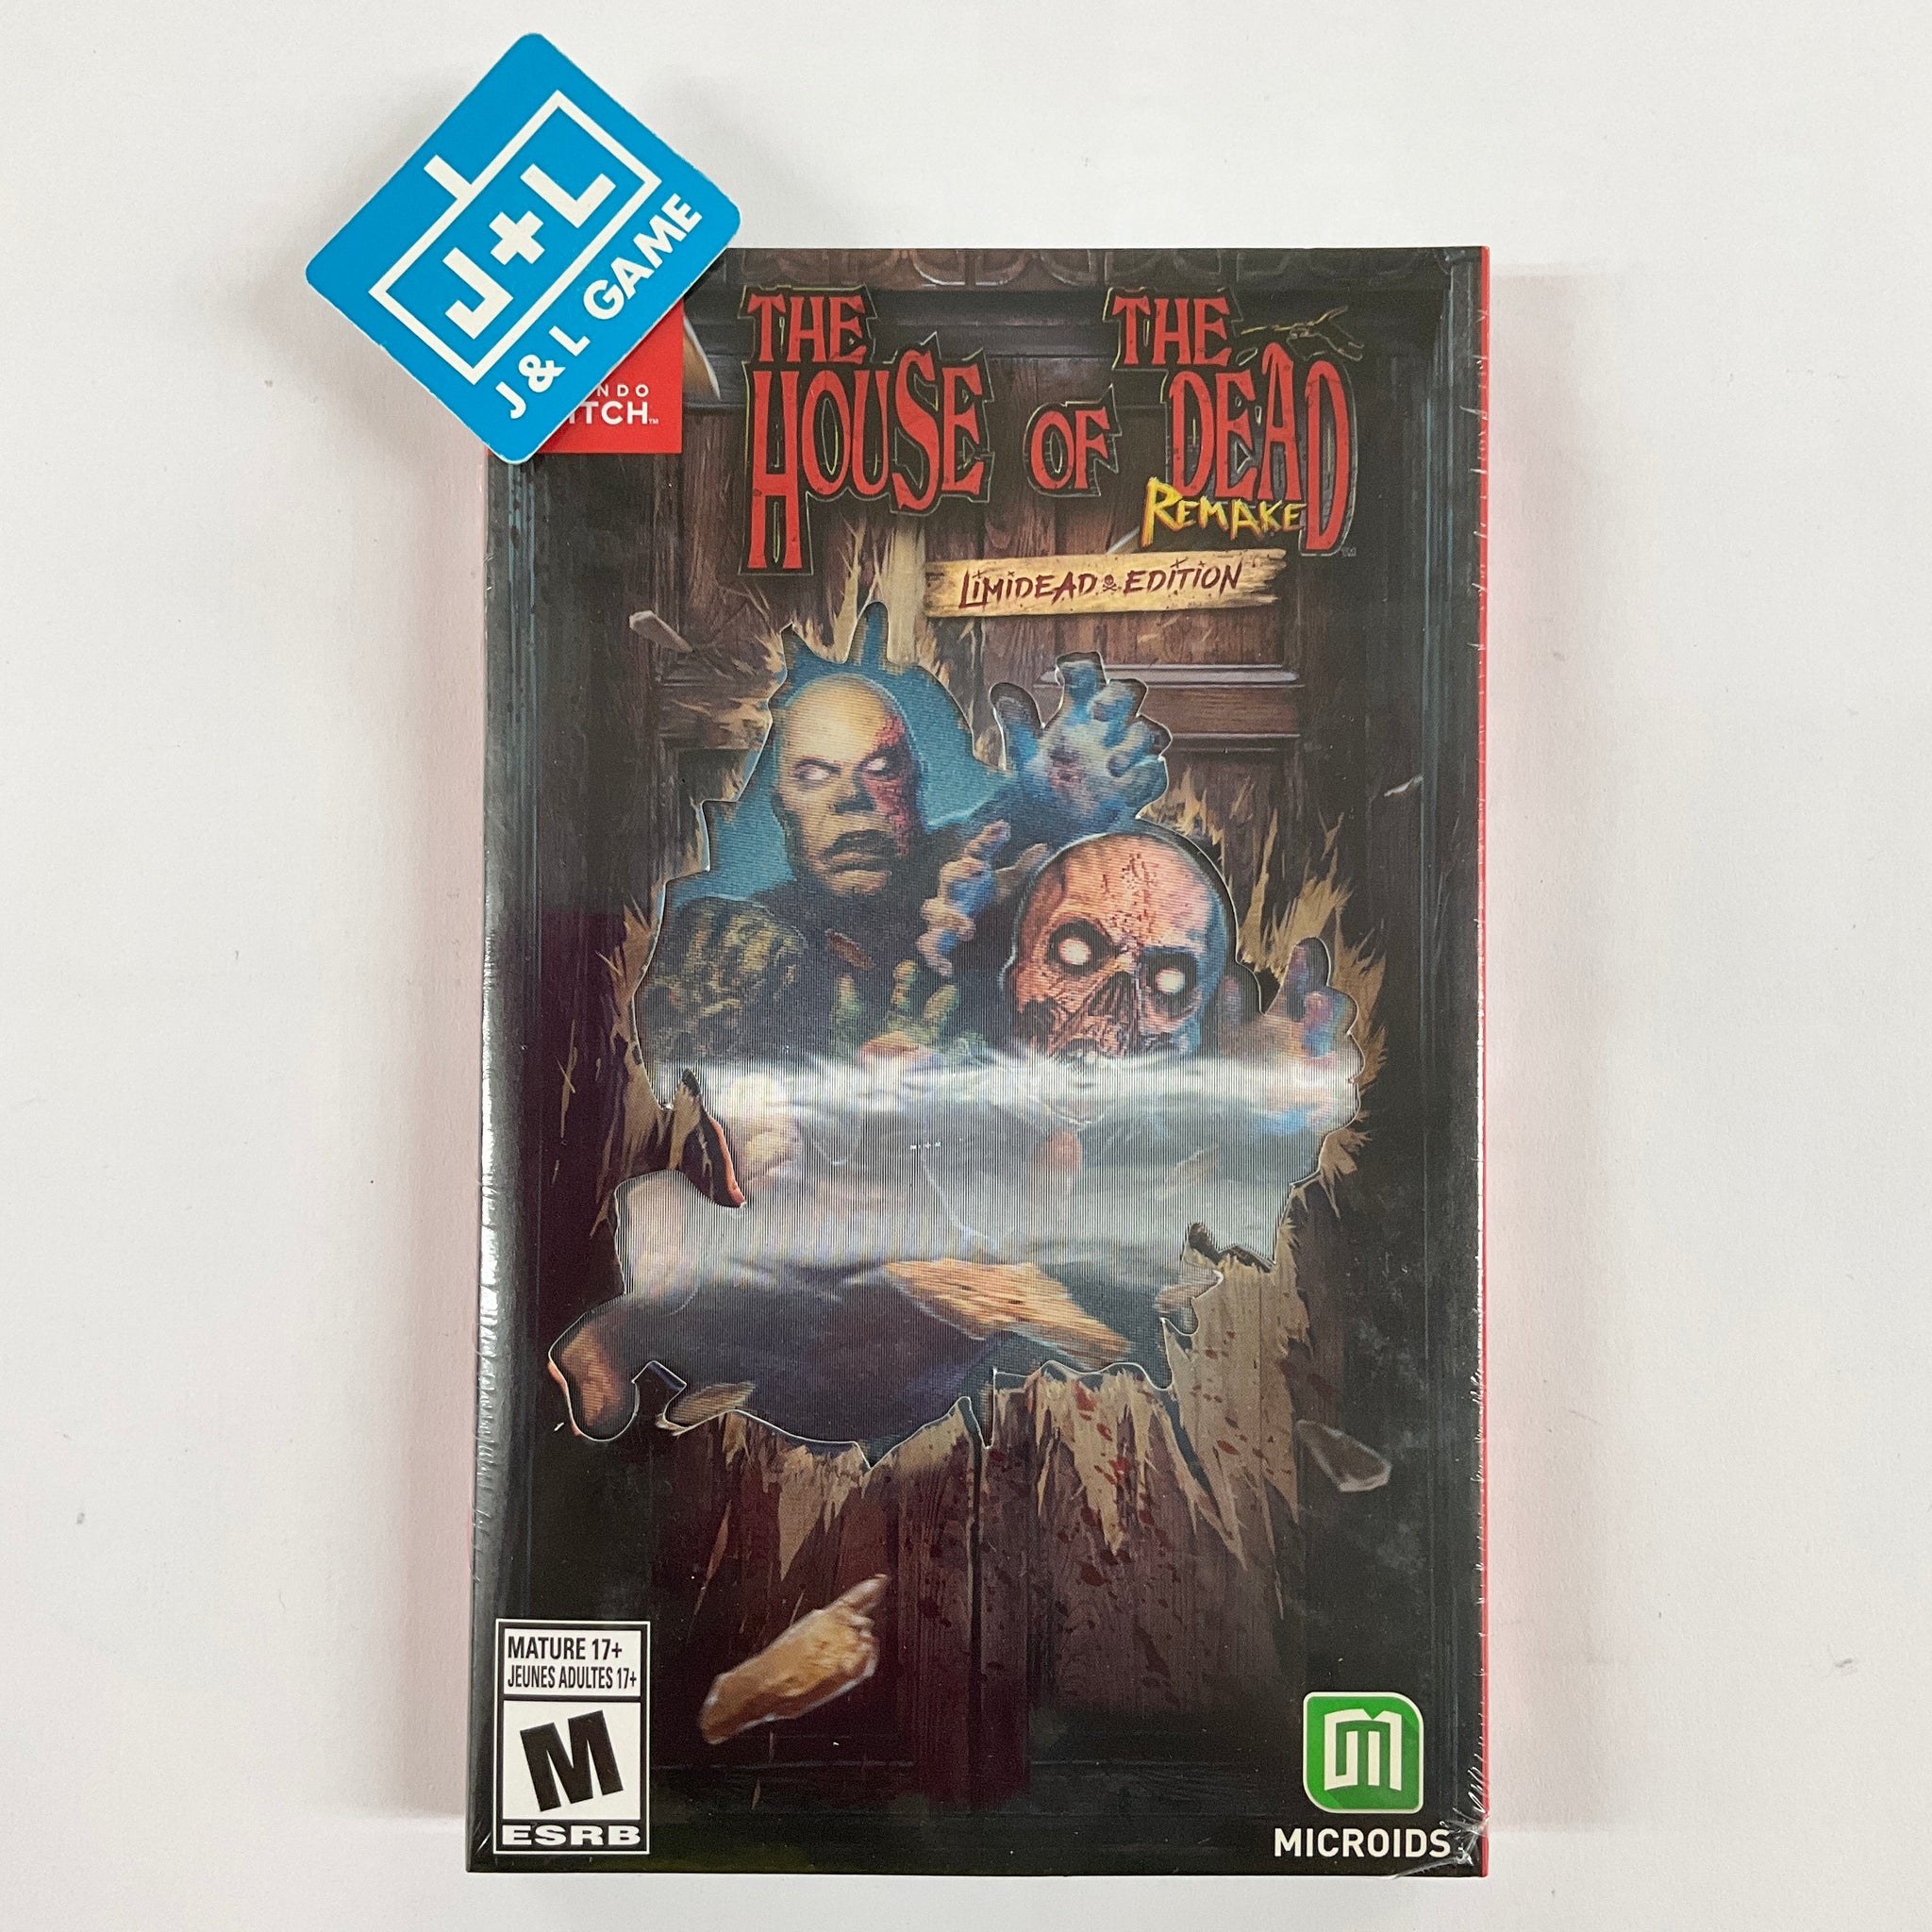 The House of the Dead: Remake (Limidead Edition) - (NSW) Nintendo Switch Video Games Maximum Games   